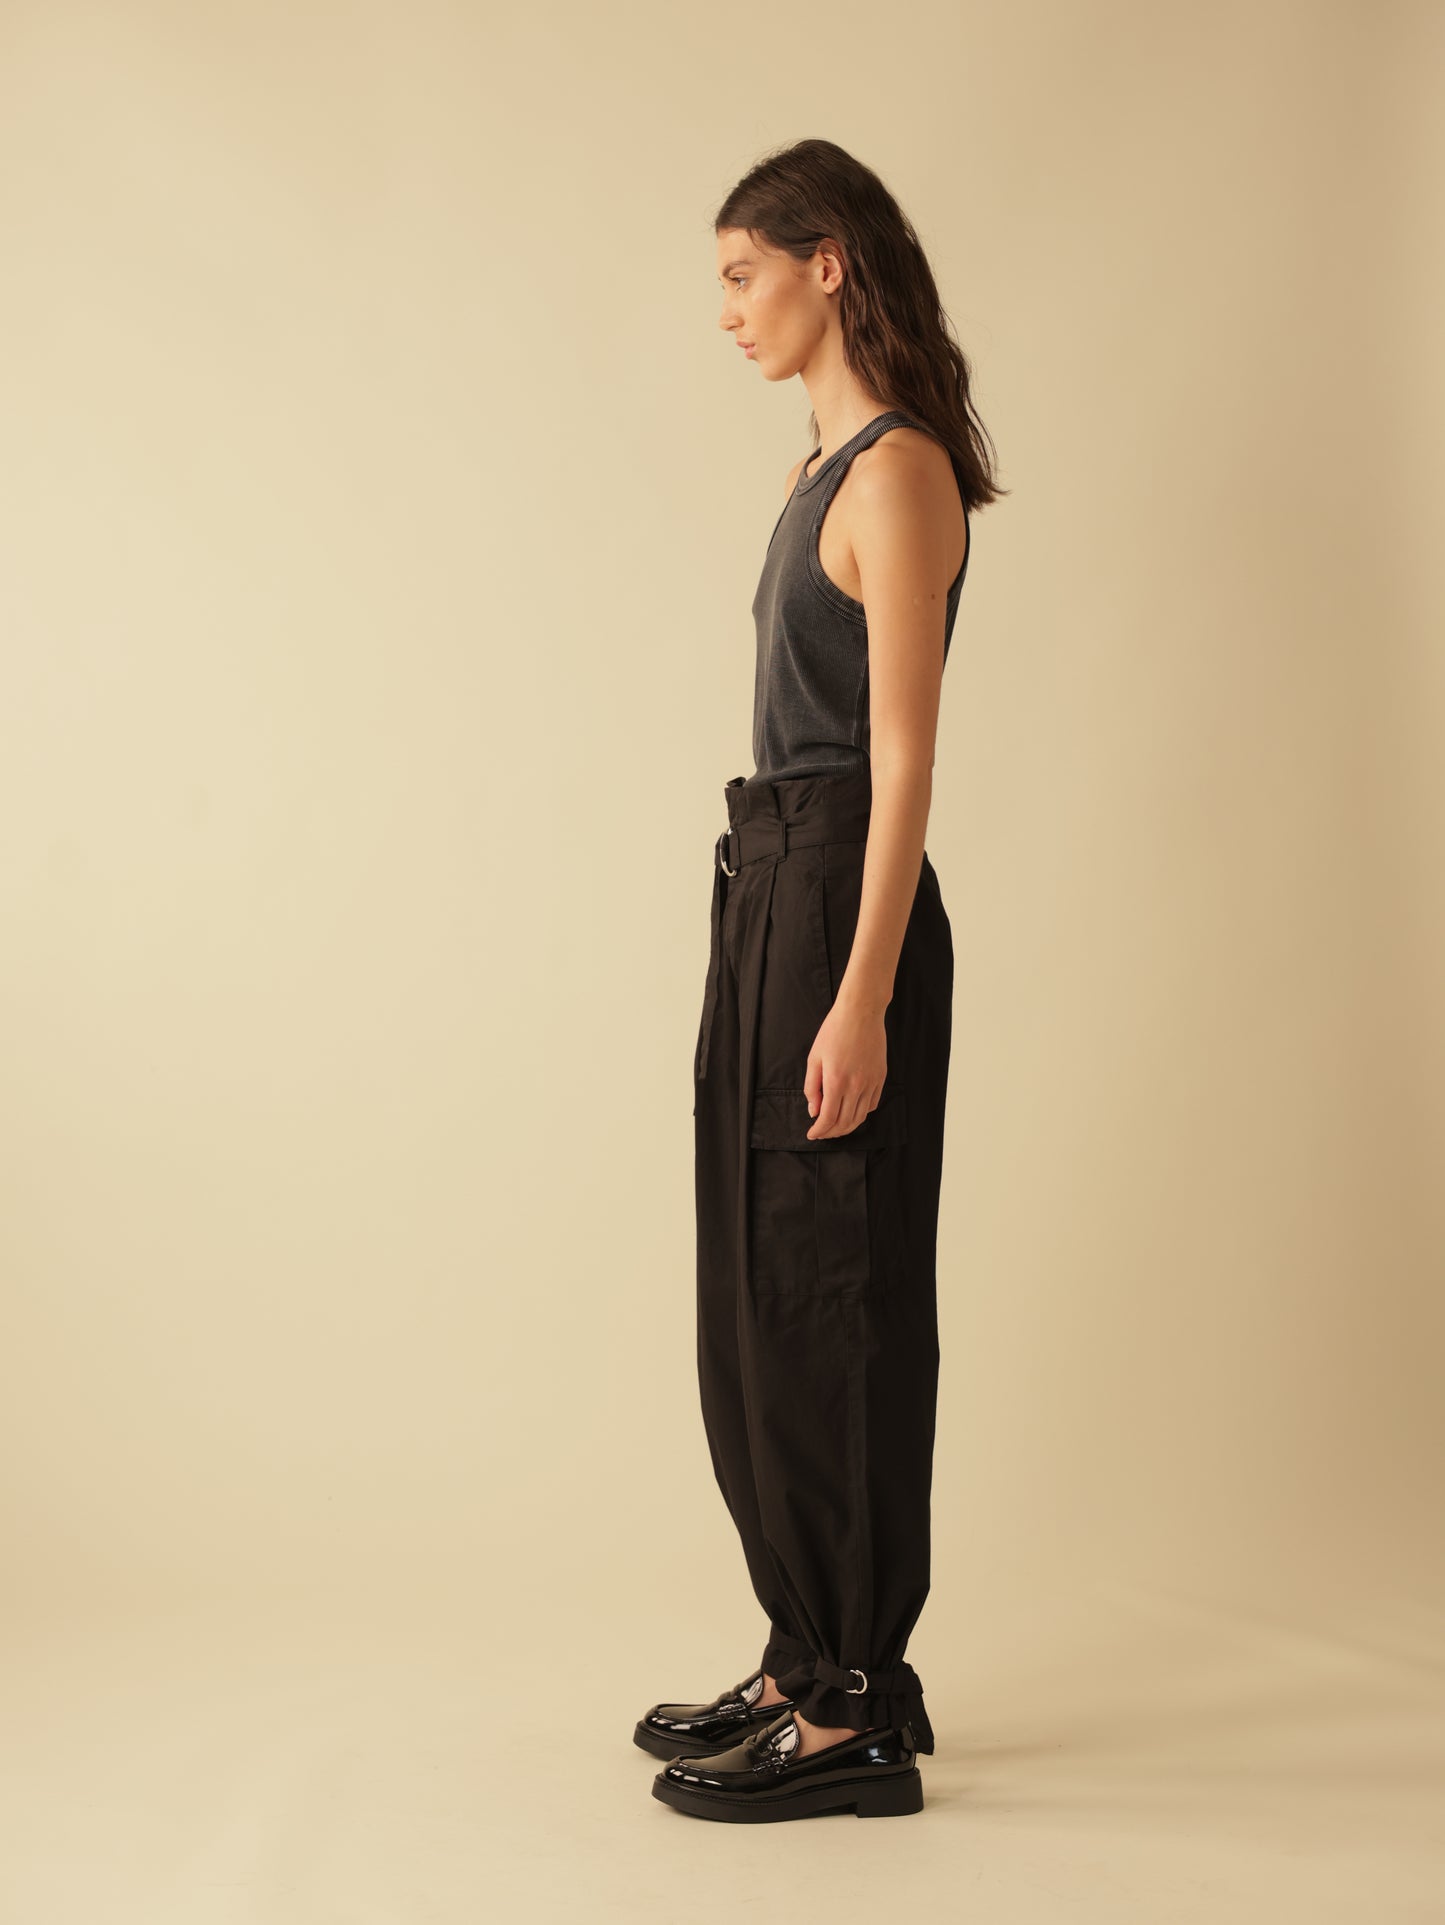 Belted Waist Utility Pants